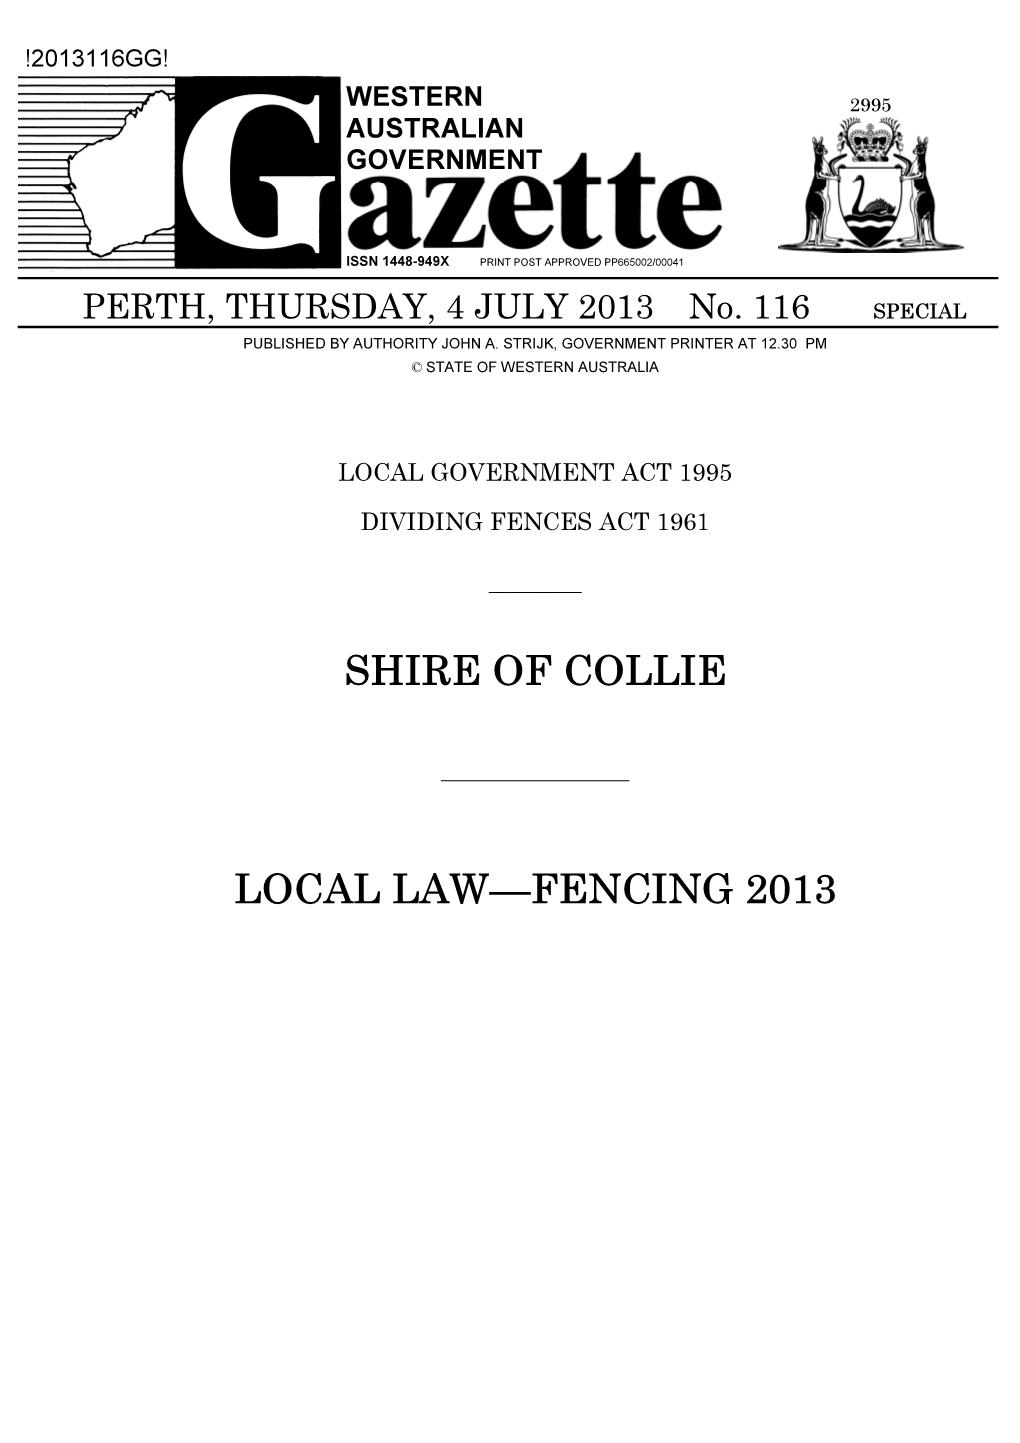 Shire of Collie Local Law—Fencing 2013